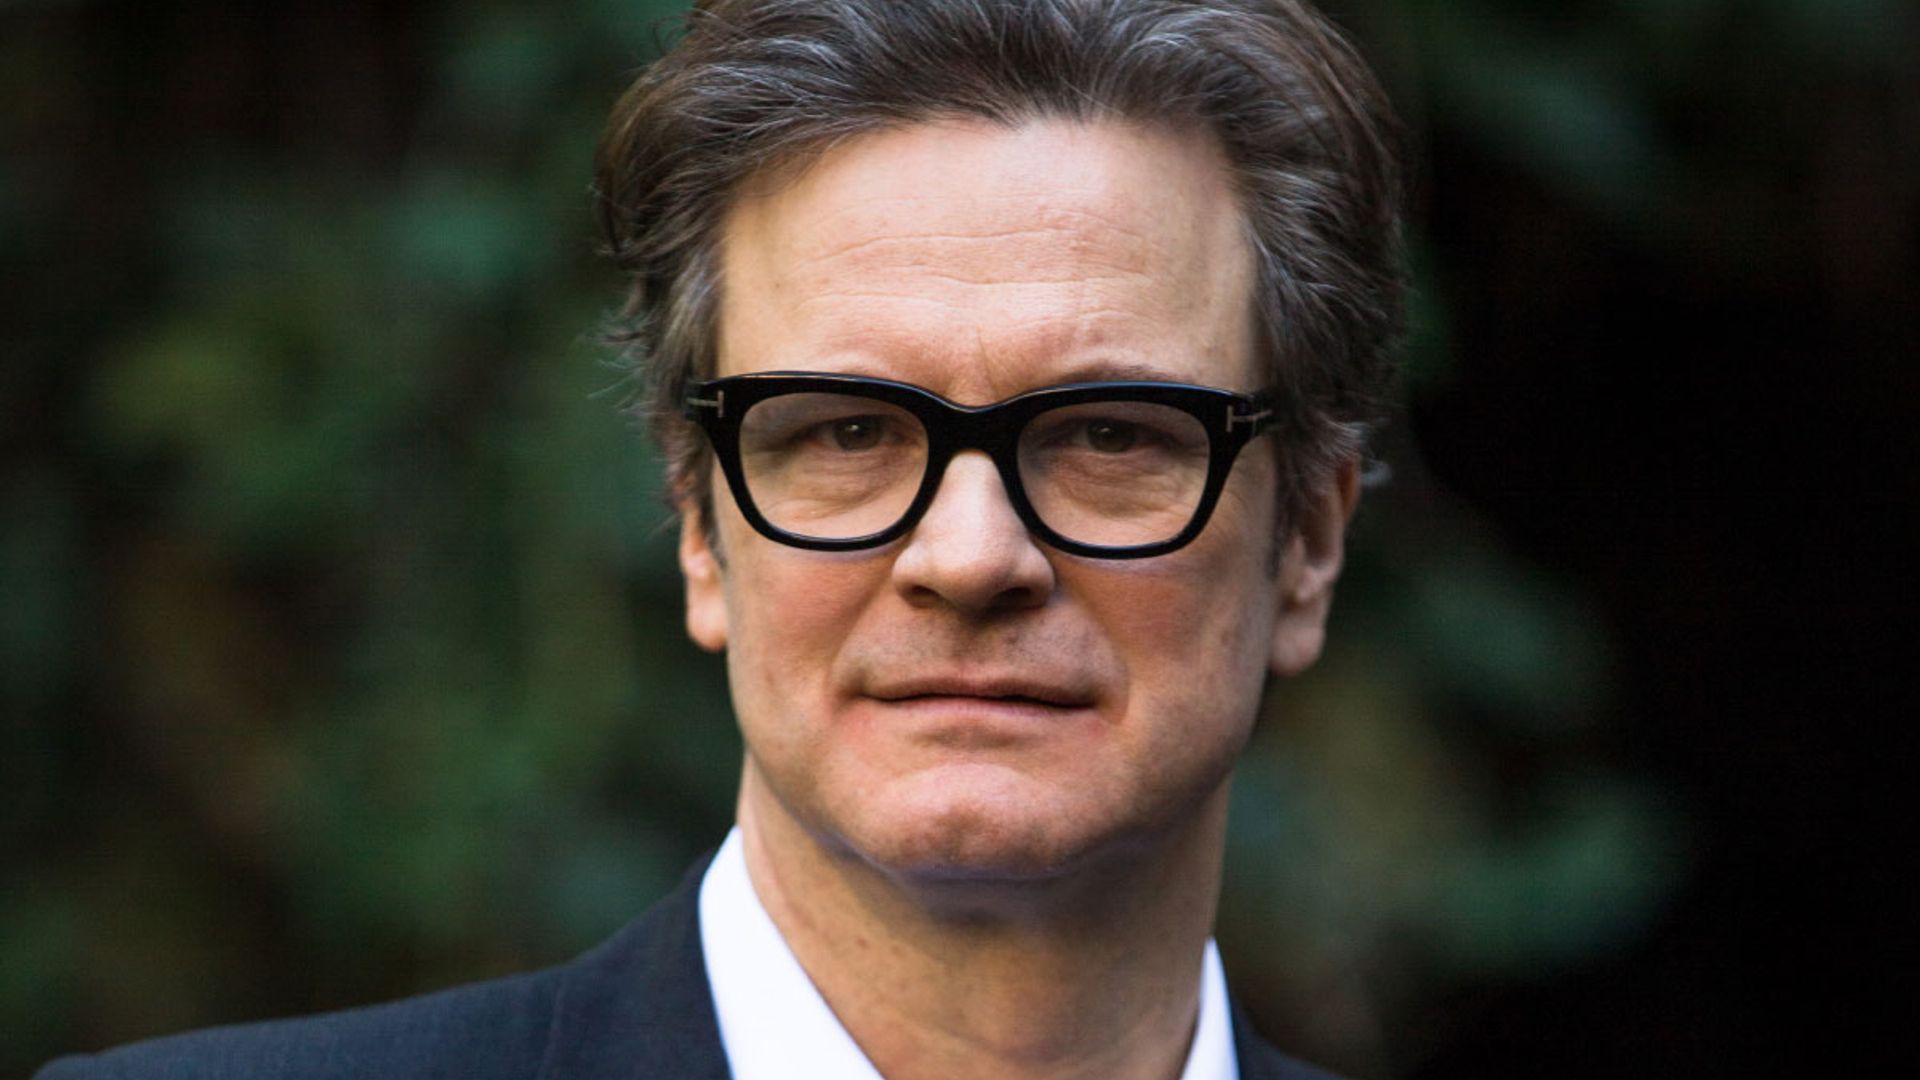 Colin Firth to make long-awaited return to television in new true-crime series